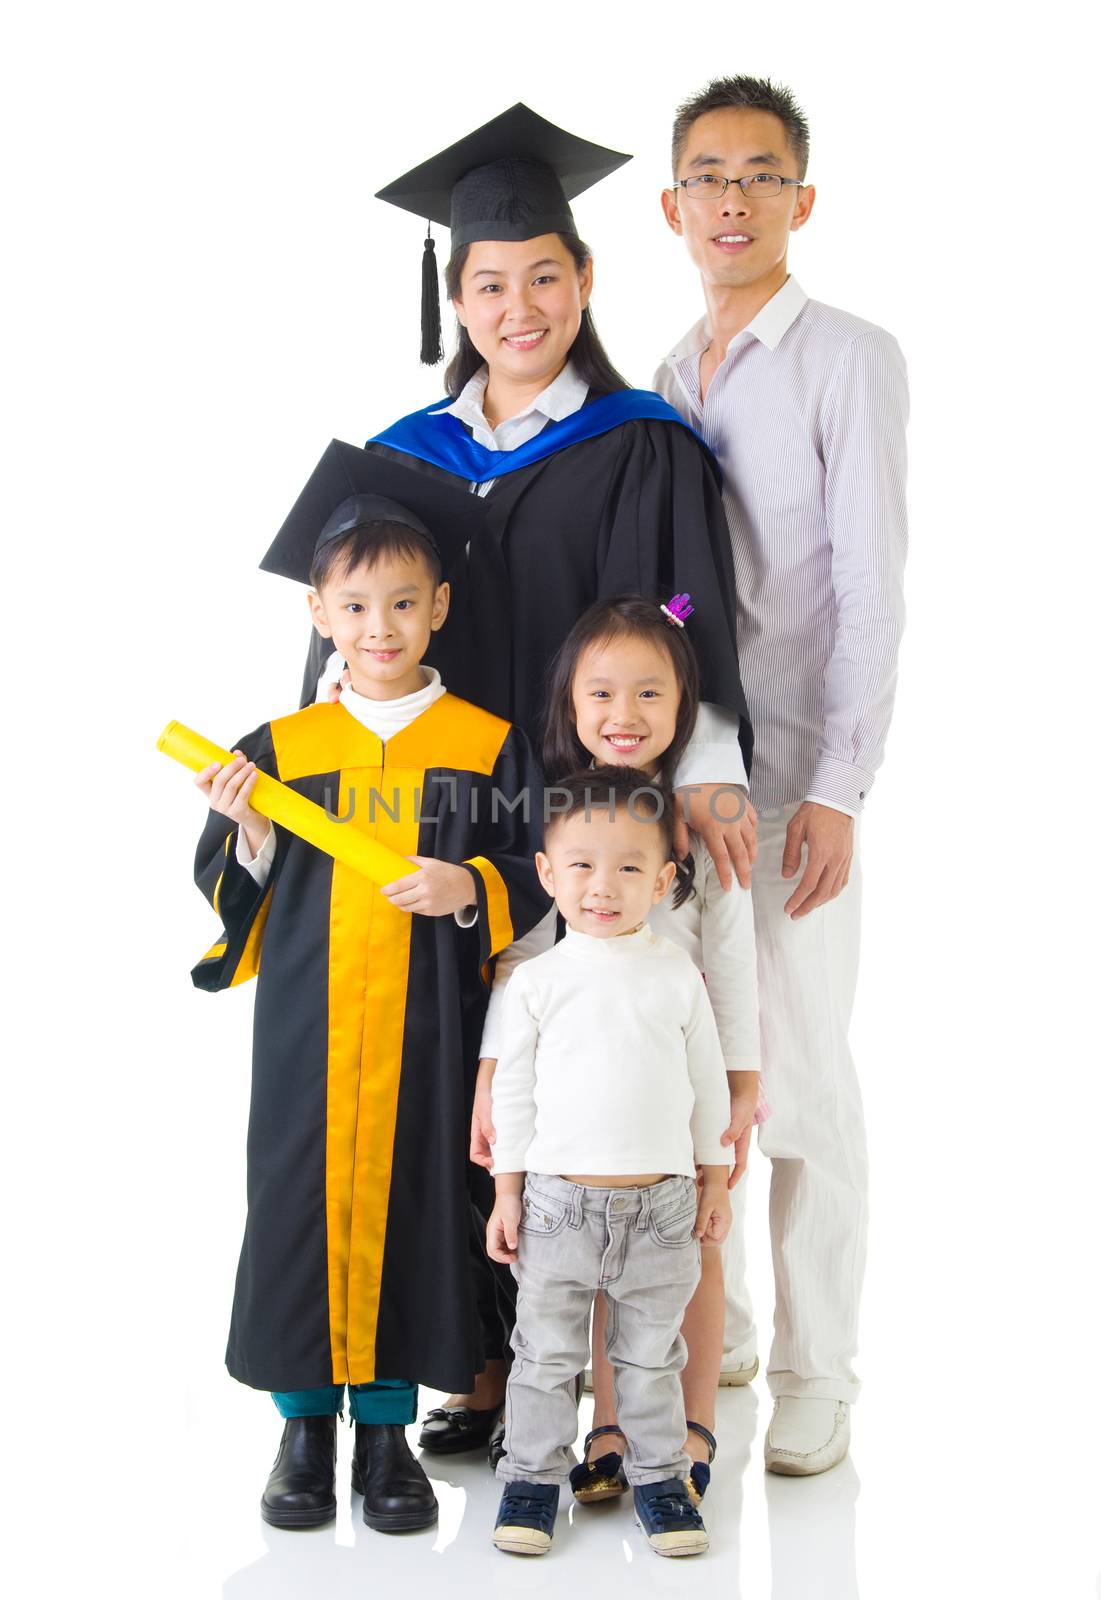 Asian mother and son in graduation gown.Taking photo with family.